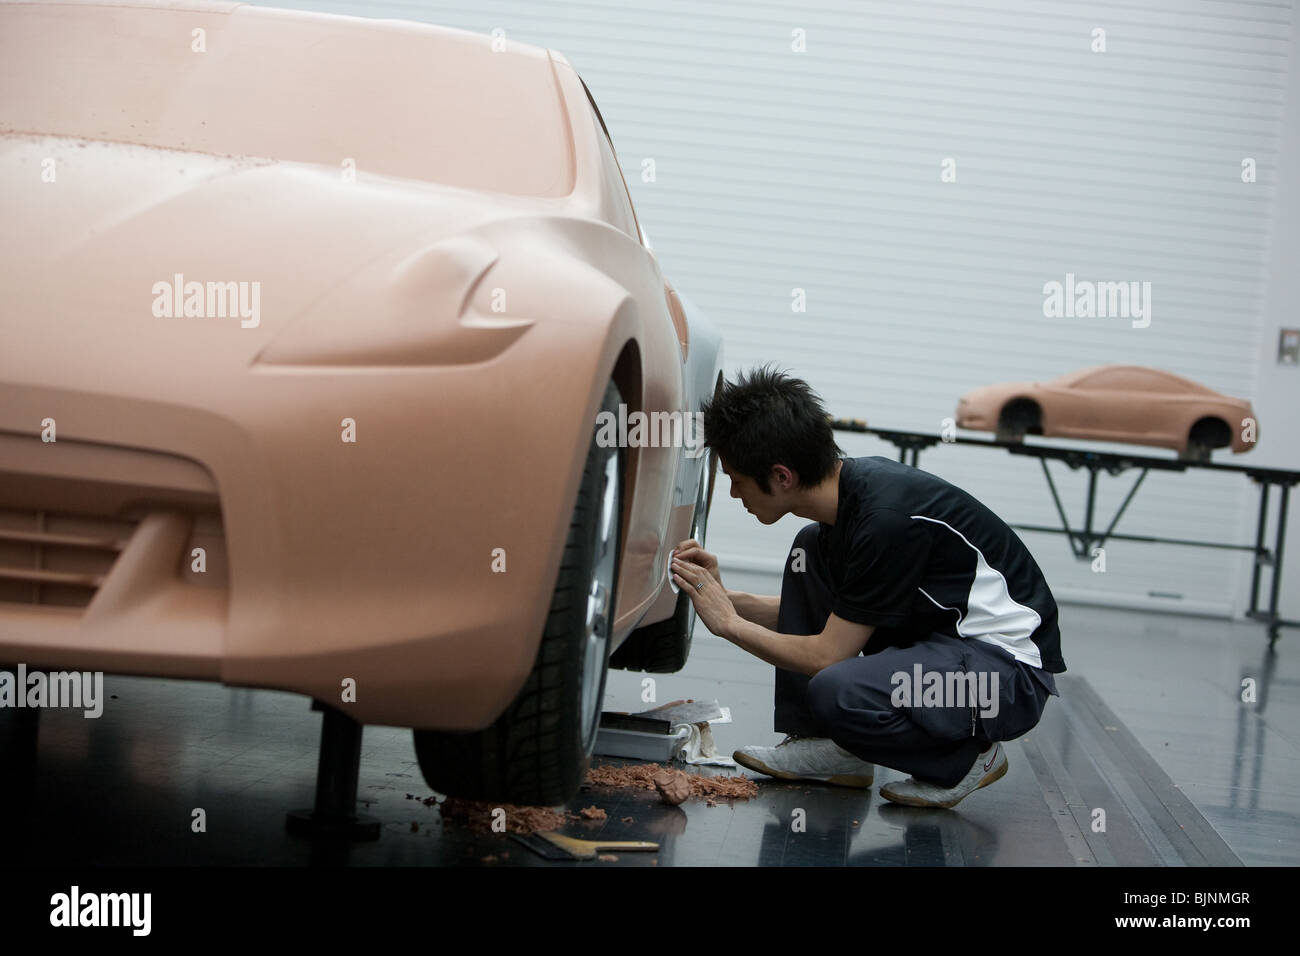 Clay modelers at work on a model of the 'Nissan Fairlady Z' car at the Nissan Design Centre, Atsugi, Japan, 2010. Stock Photo